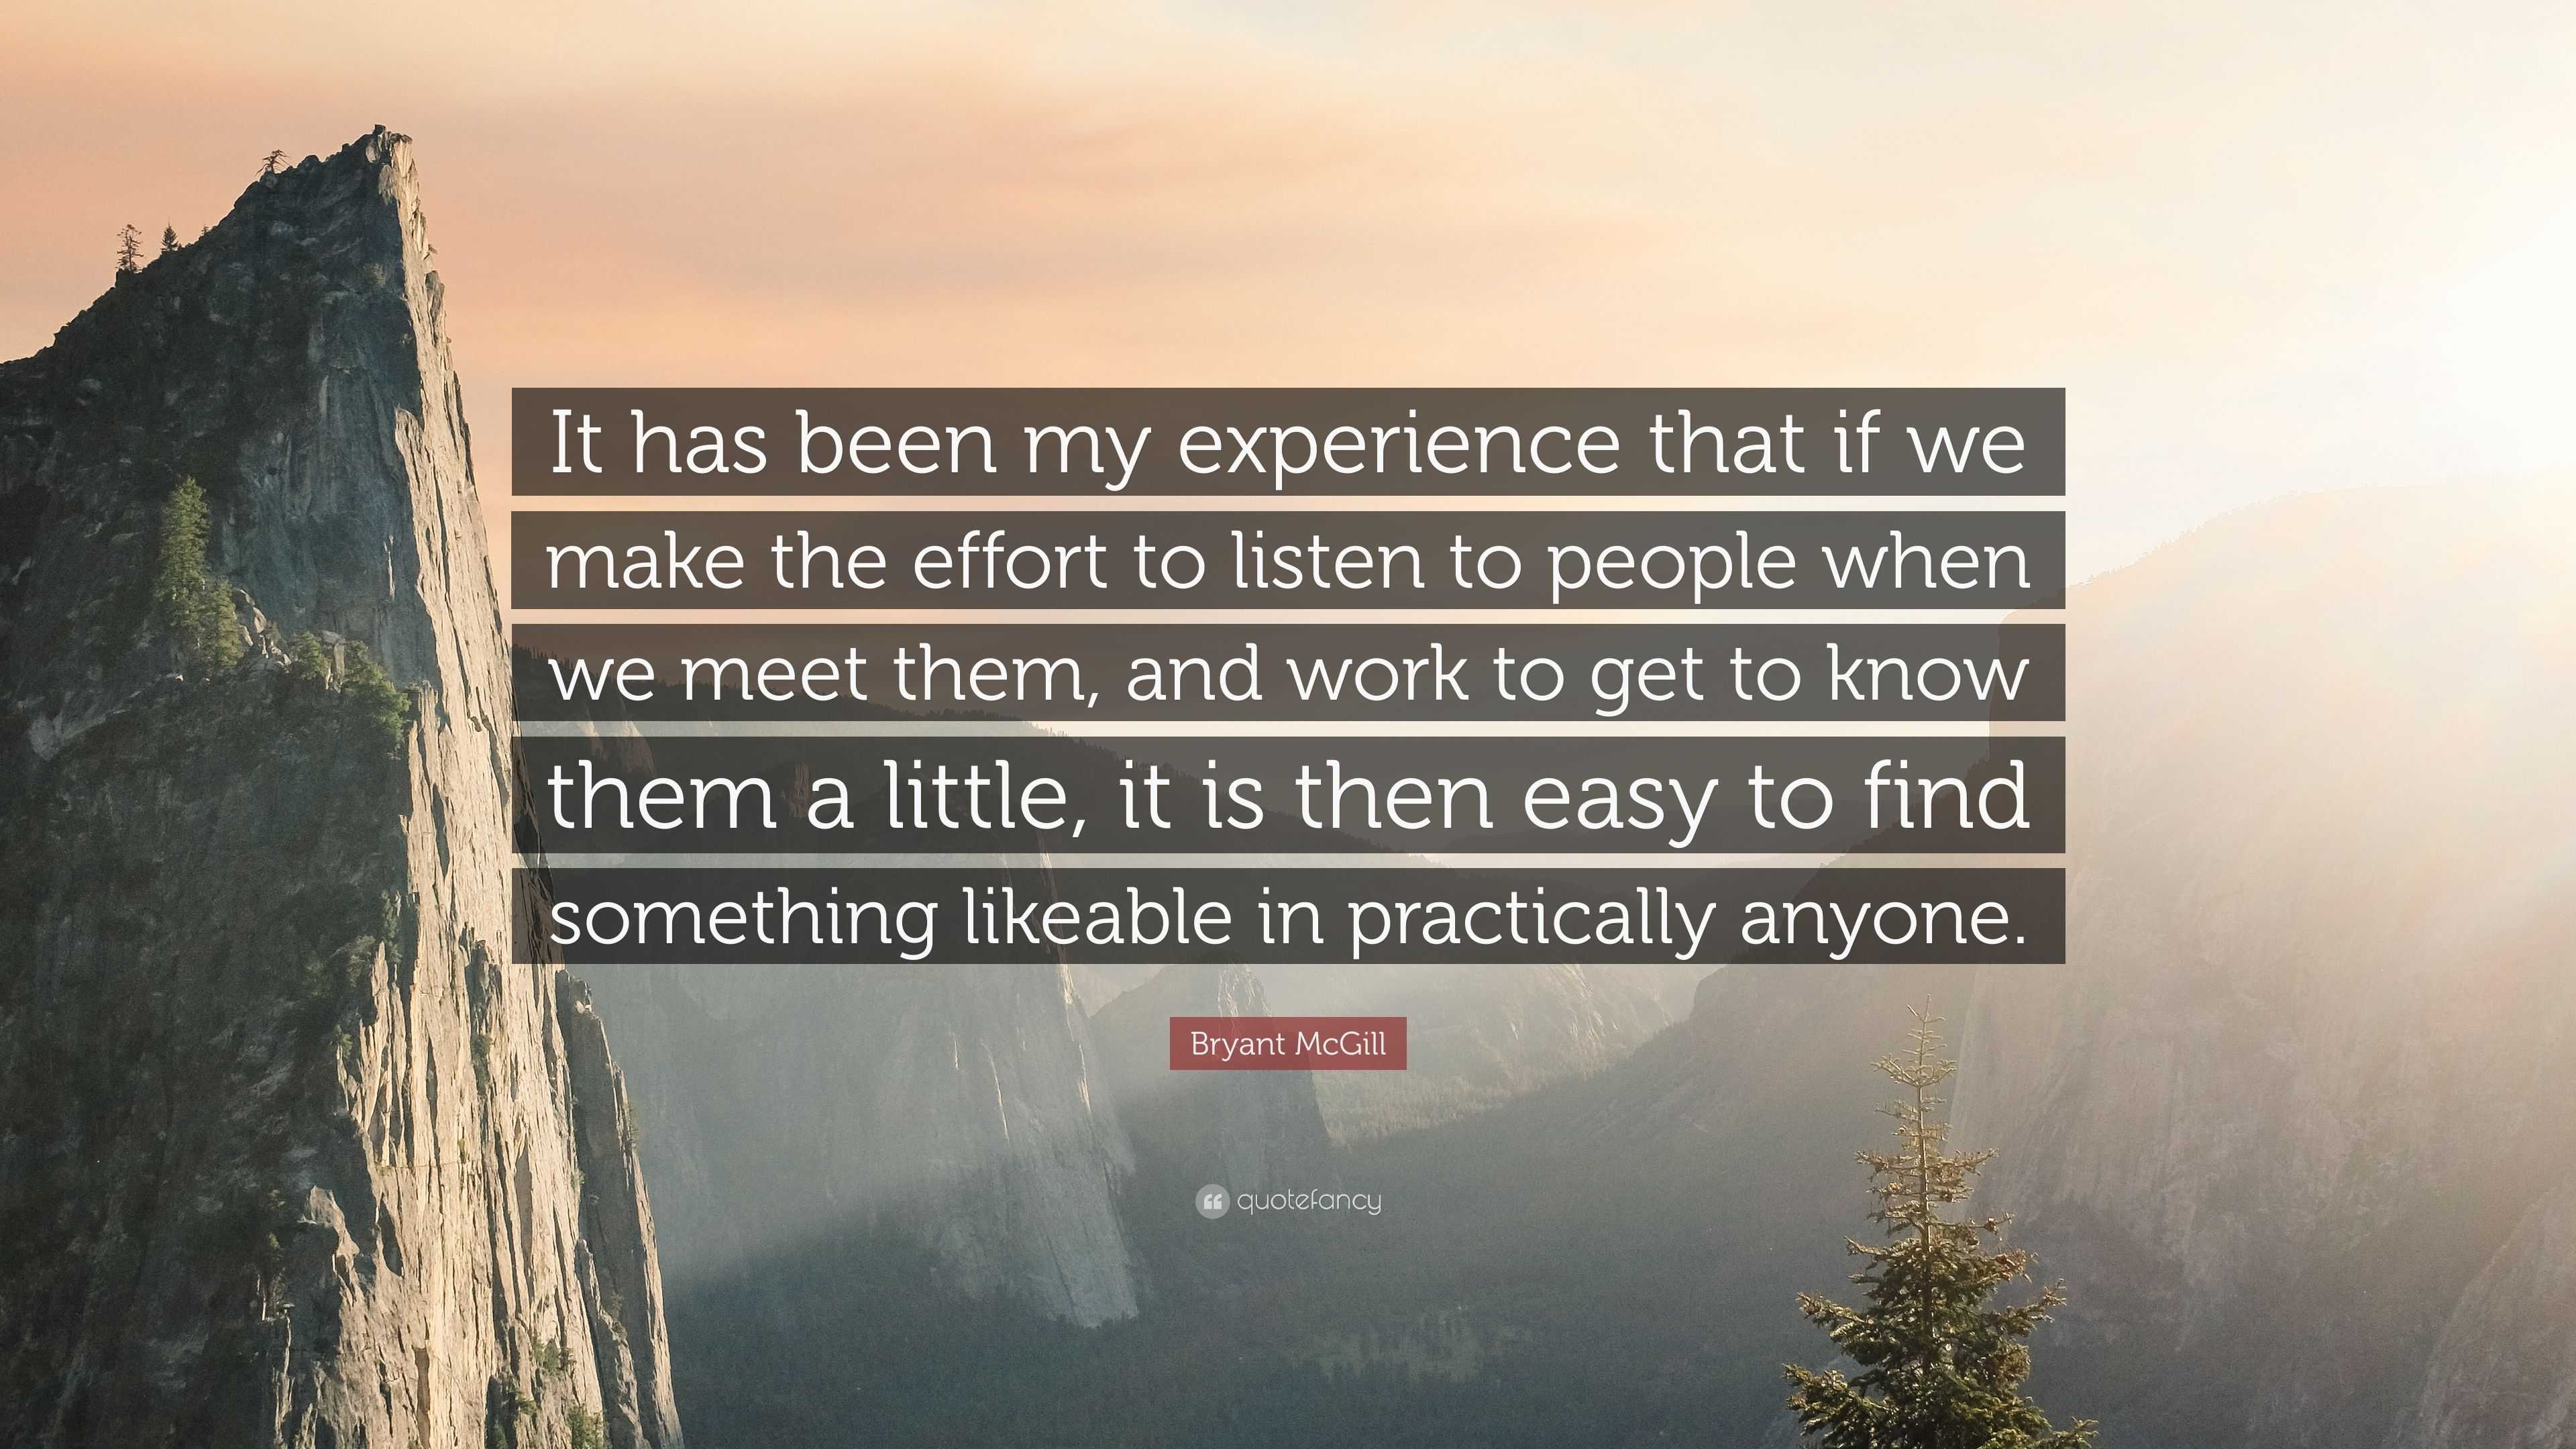 Bryant McGill Quote: “It has been my experience that if we make the effort  to listen to people when we meet them, and work to get to know them”